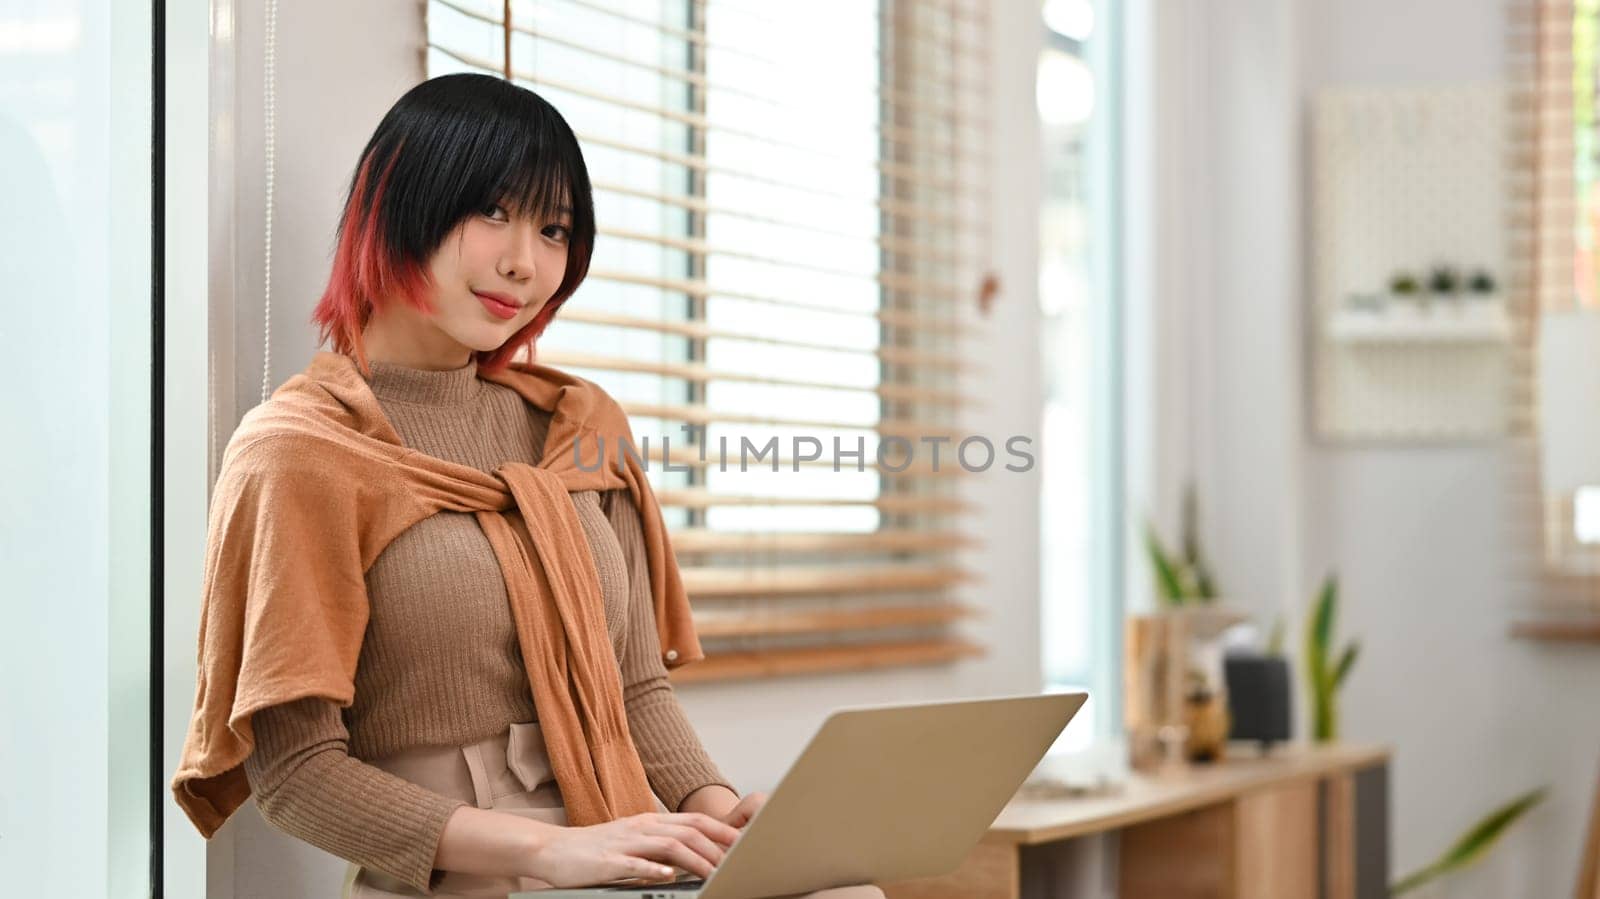 Portrait of pretty asian woman in stylish outfit using laptop at home office. Freelance, creative occupation, e-learning concept by prathanchorruangsak